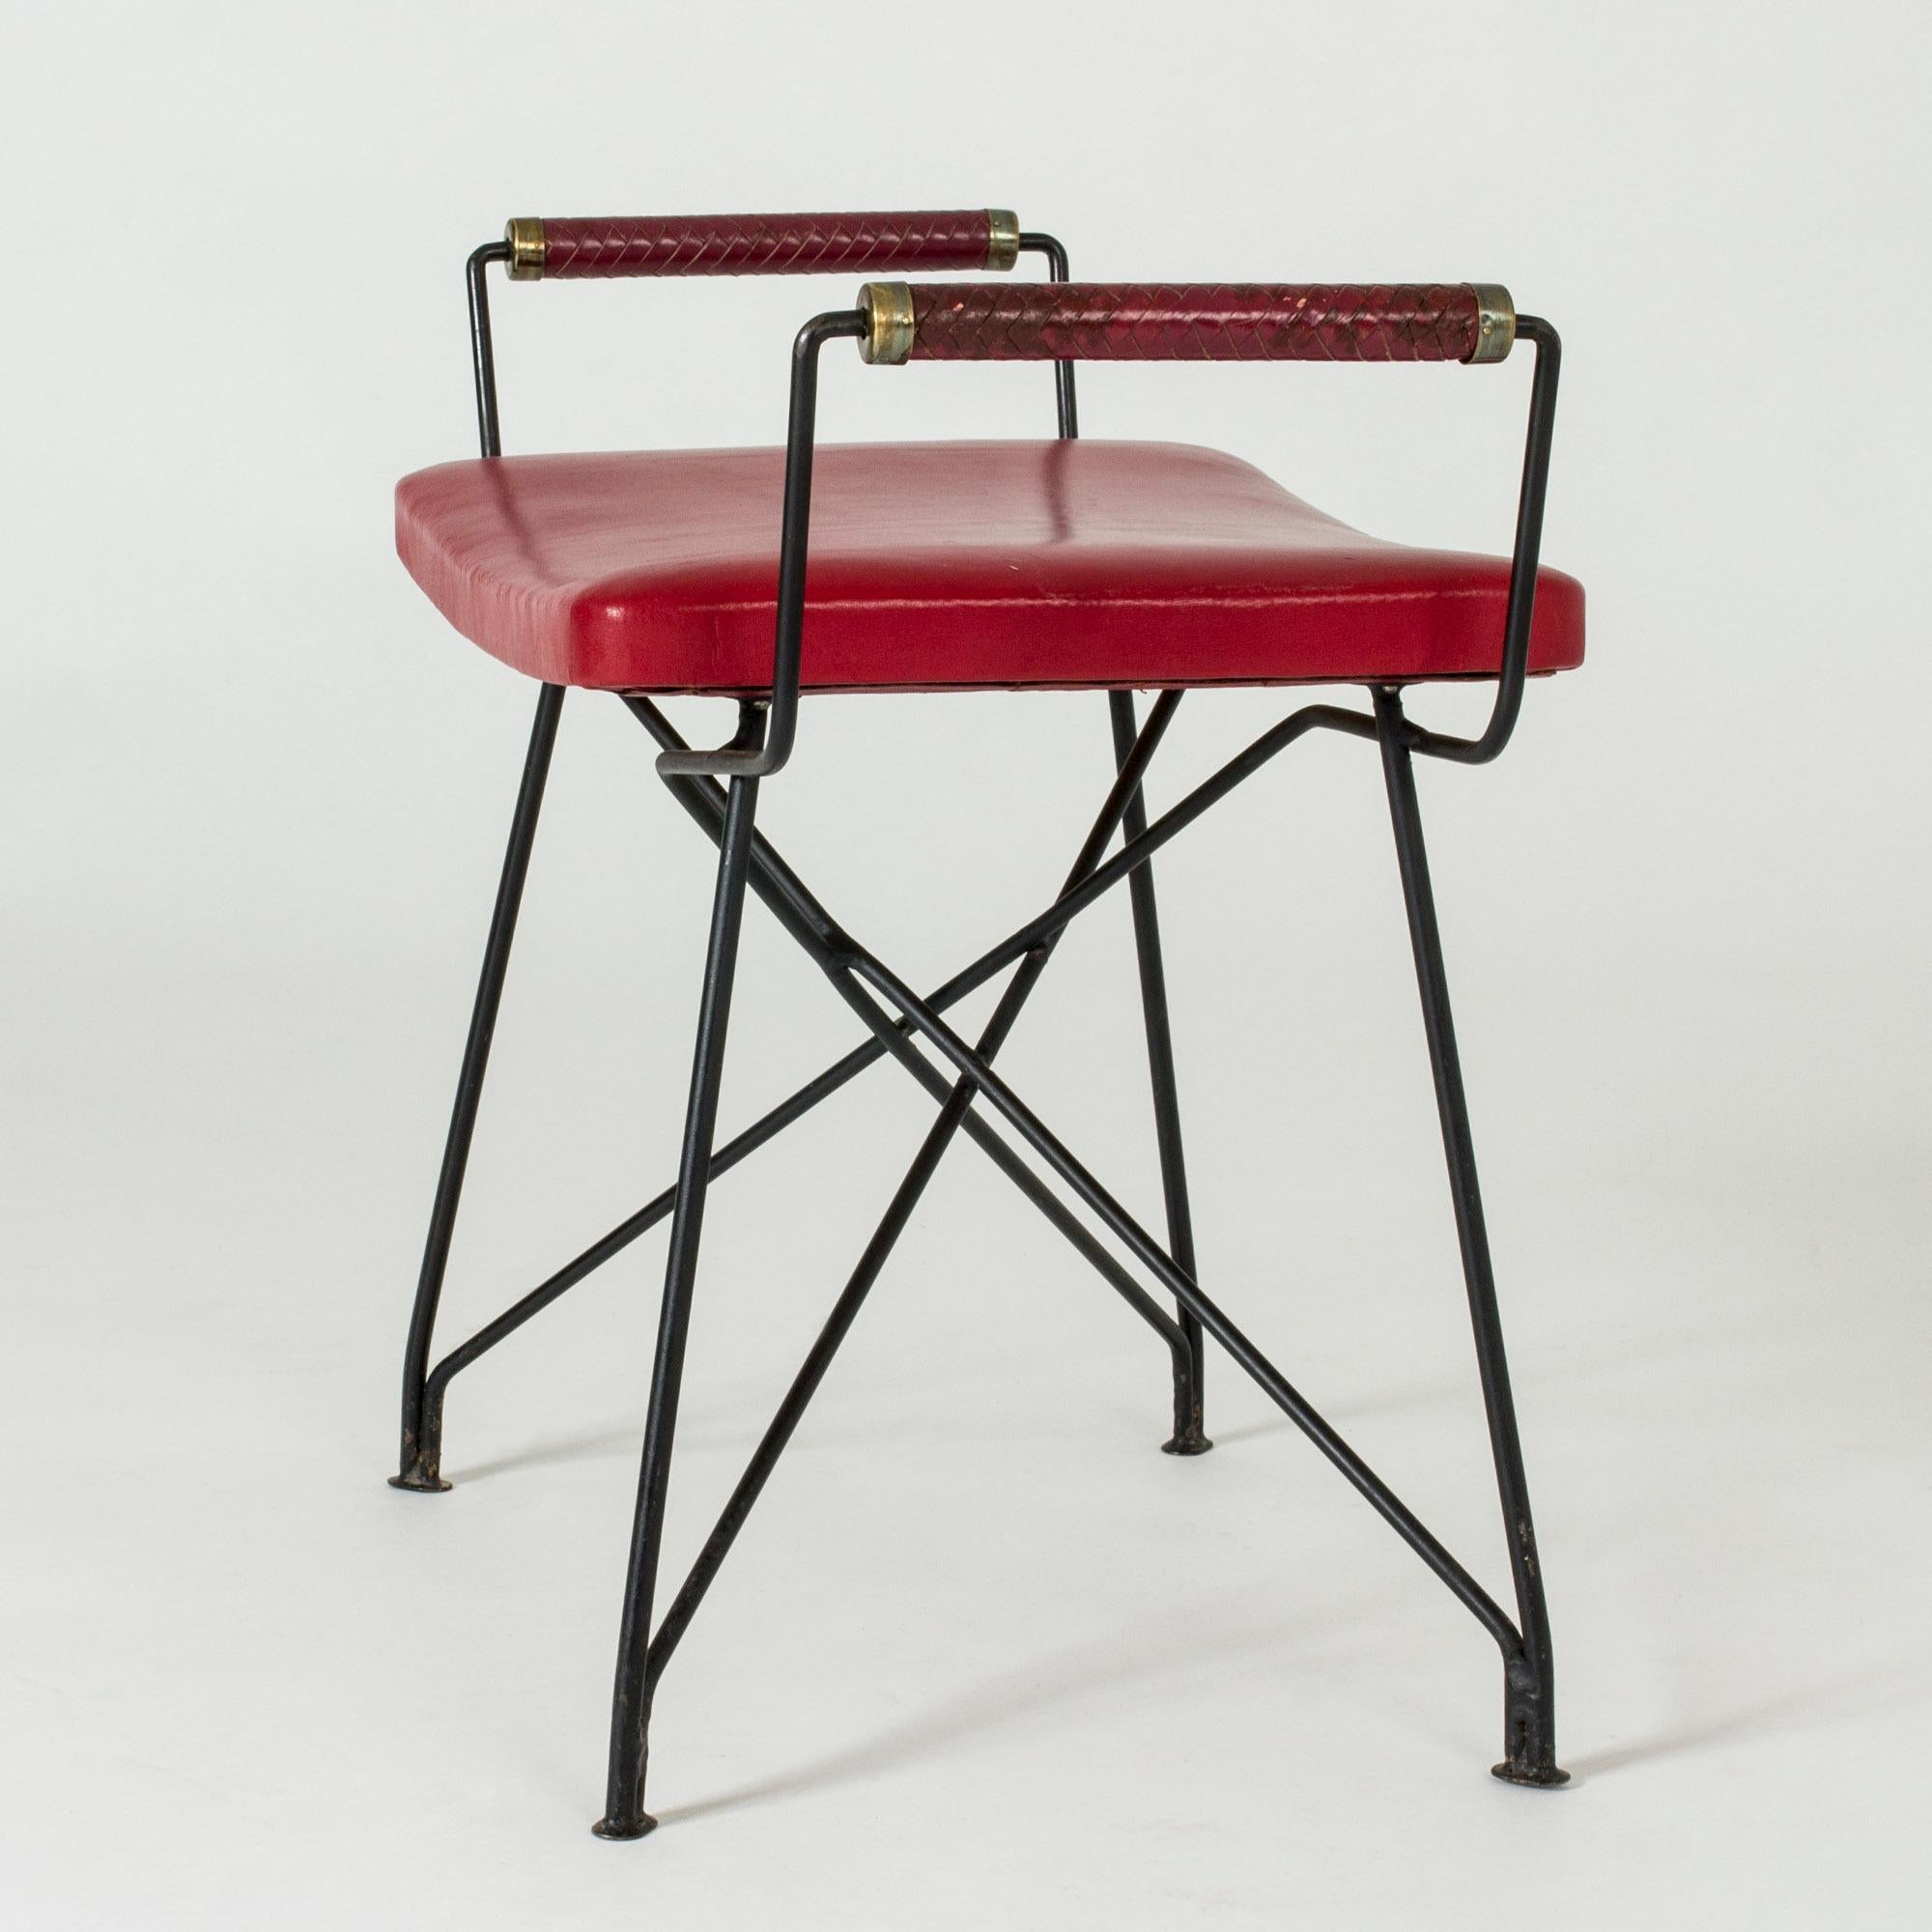 Scandinavian Modern Rare Swedish Metal and Leather Stool by Hans-Agne Jakobsson, 1960s